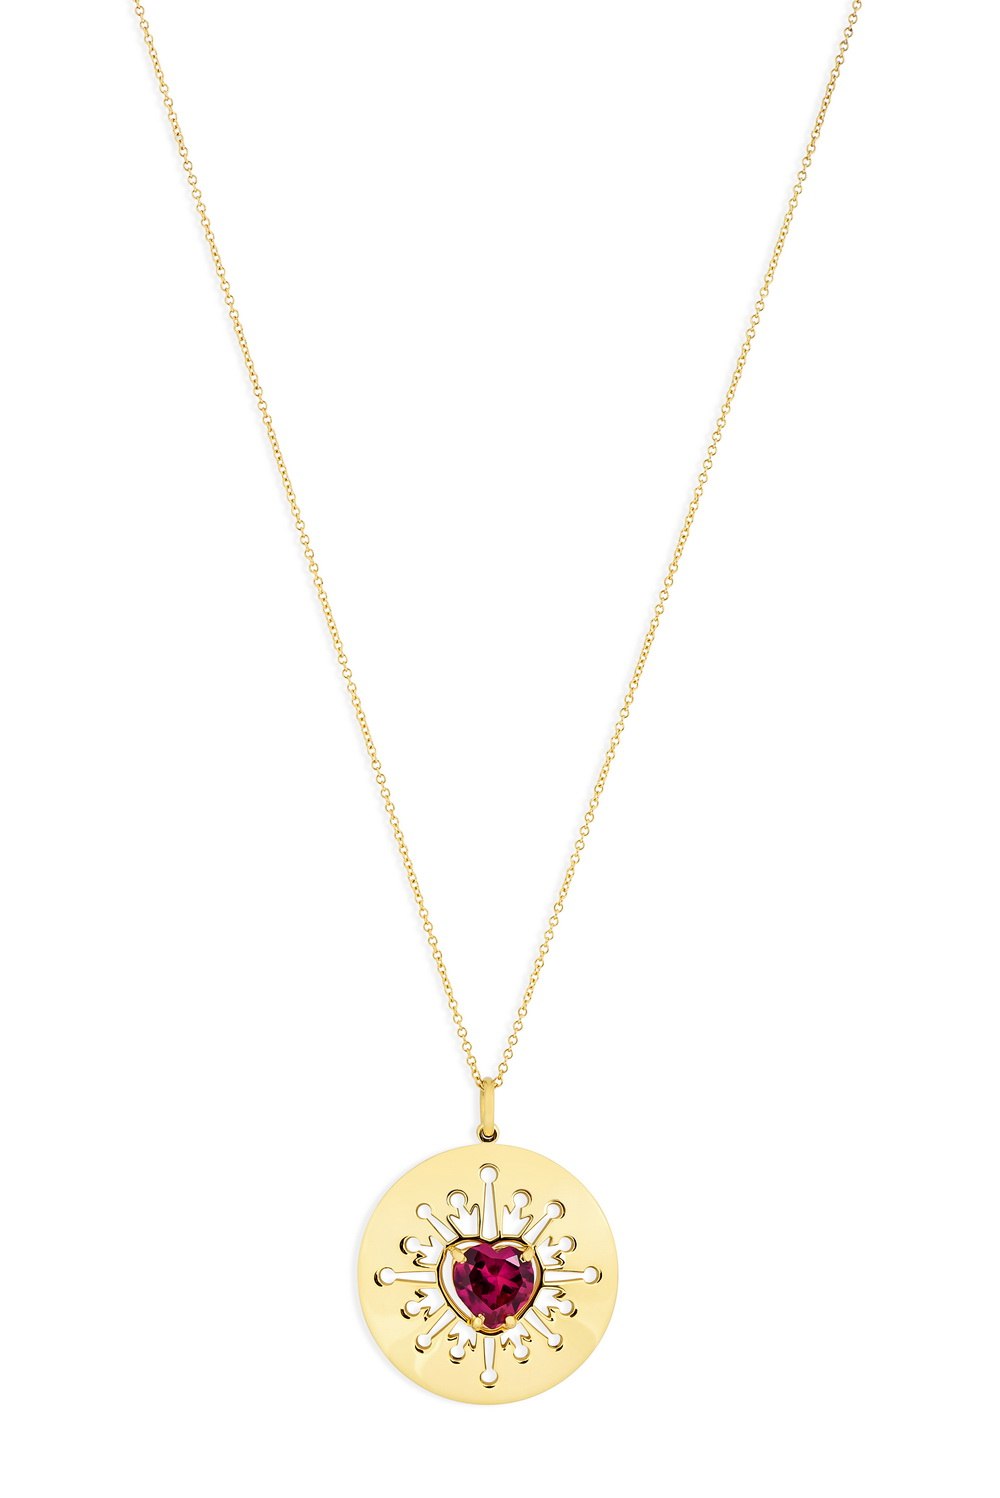 ANASTASIA KESSARIS Red Heart In Round Yellow Pendant Necklace with Ray Cut-Outs KOP180102